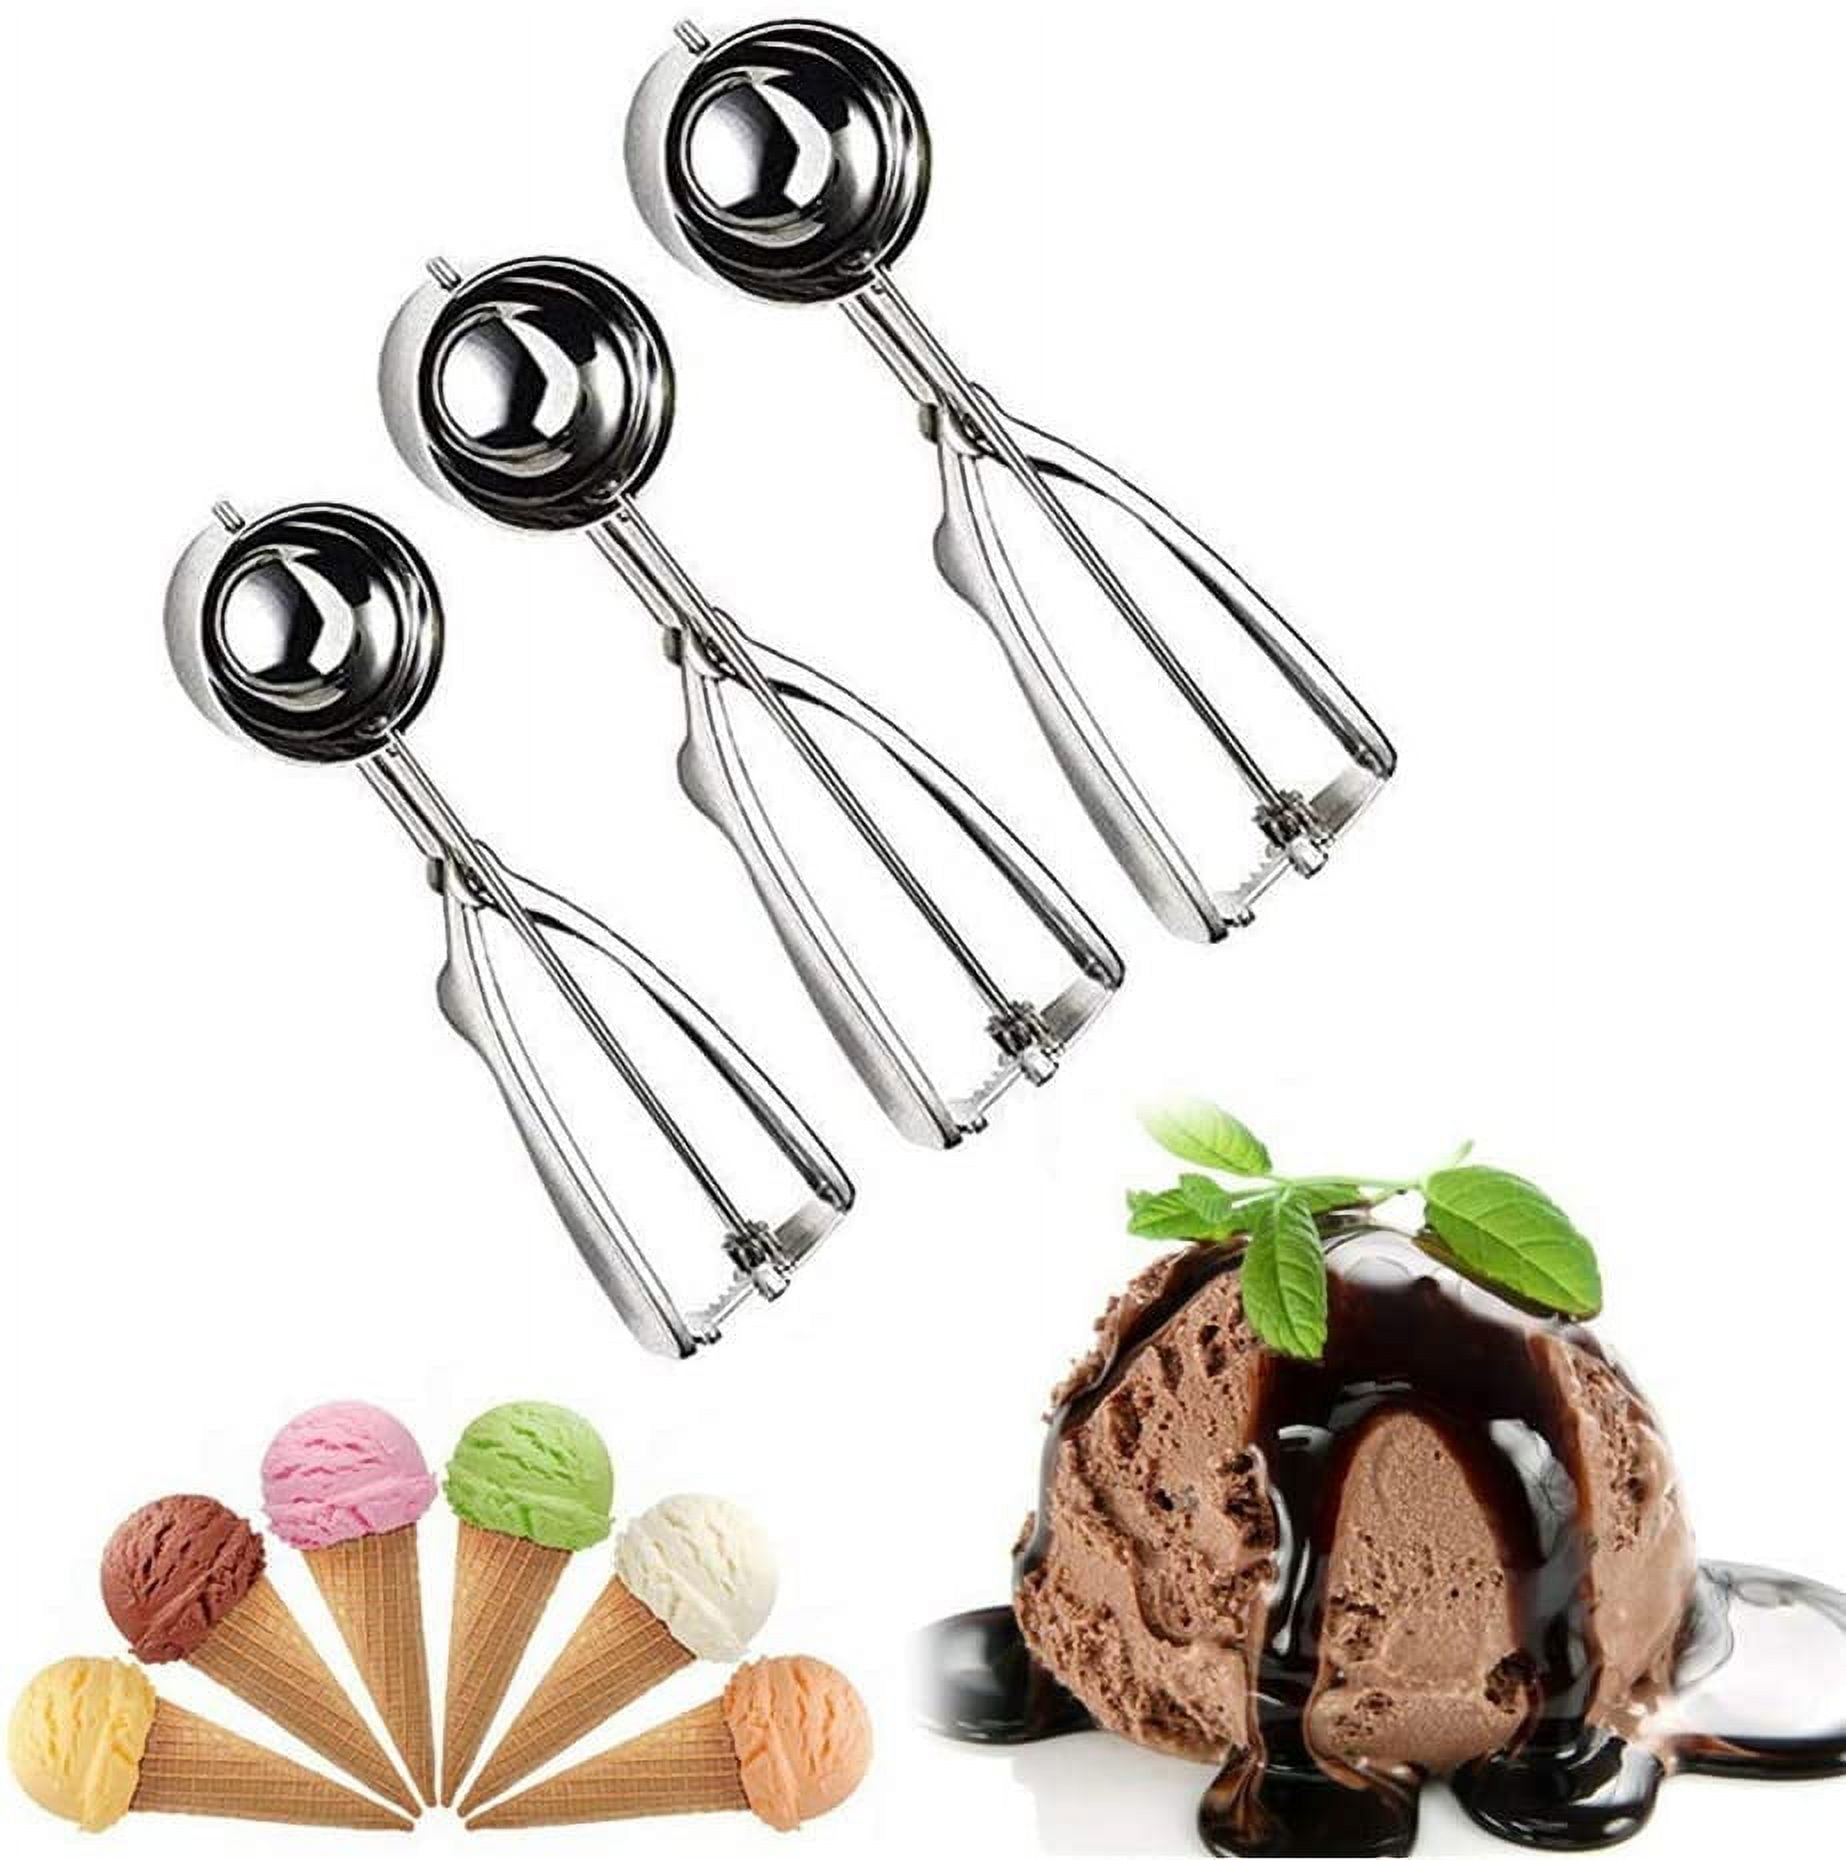 Cookie Scoop Set, Tuilful Ice Cream Scoops Set Of 3 With Trigger, 18/8  Stainless Steel Cookie Scoops For Baking, Include Large-m - Ice Cream Tools  - AliExpress